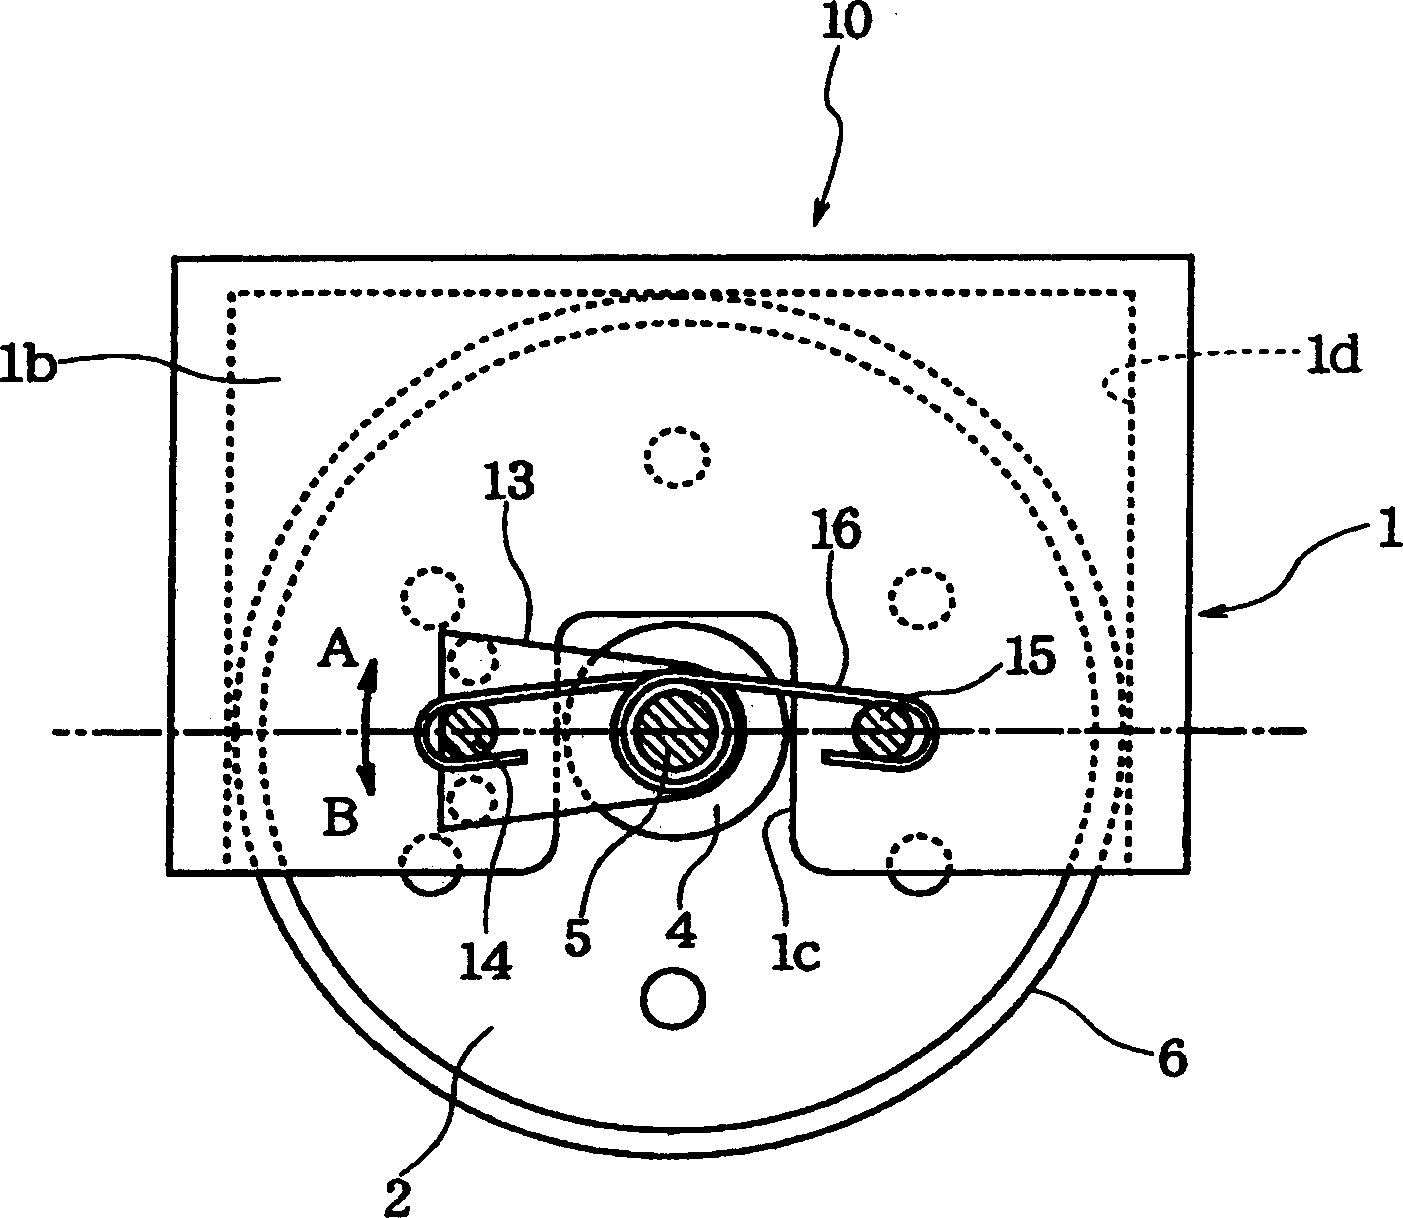 Variable vibration generator and electronic machine equiped with the same vibration generating device